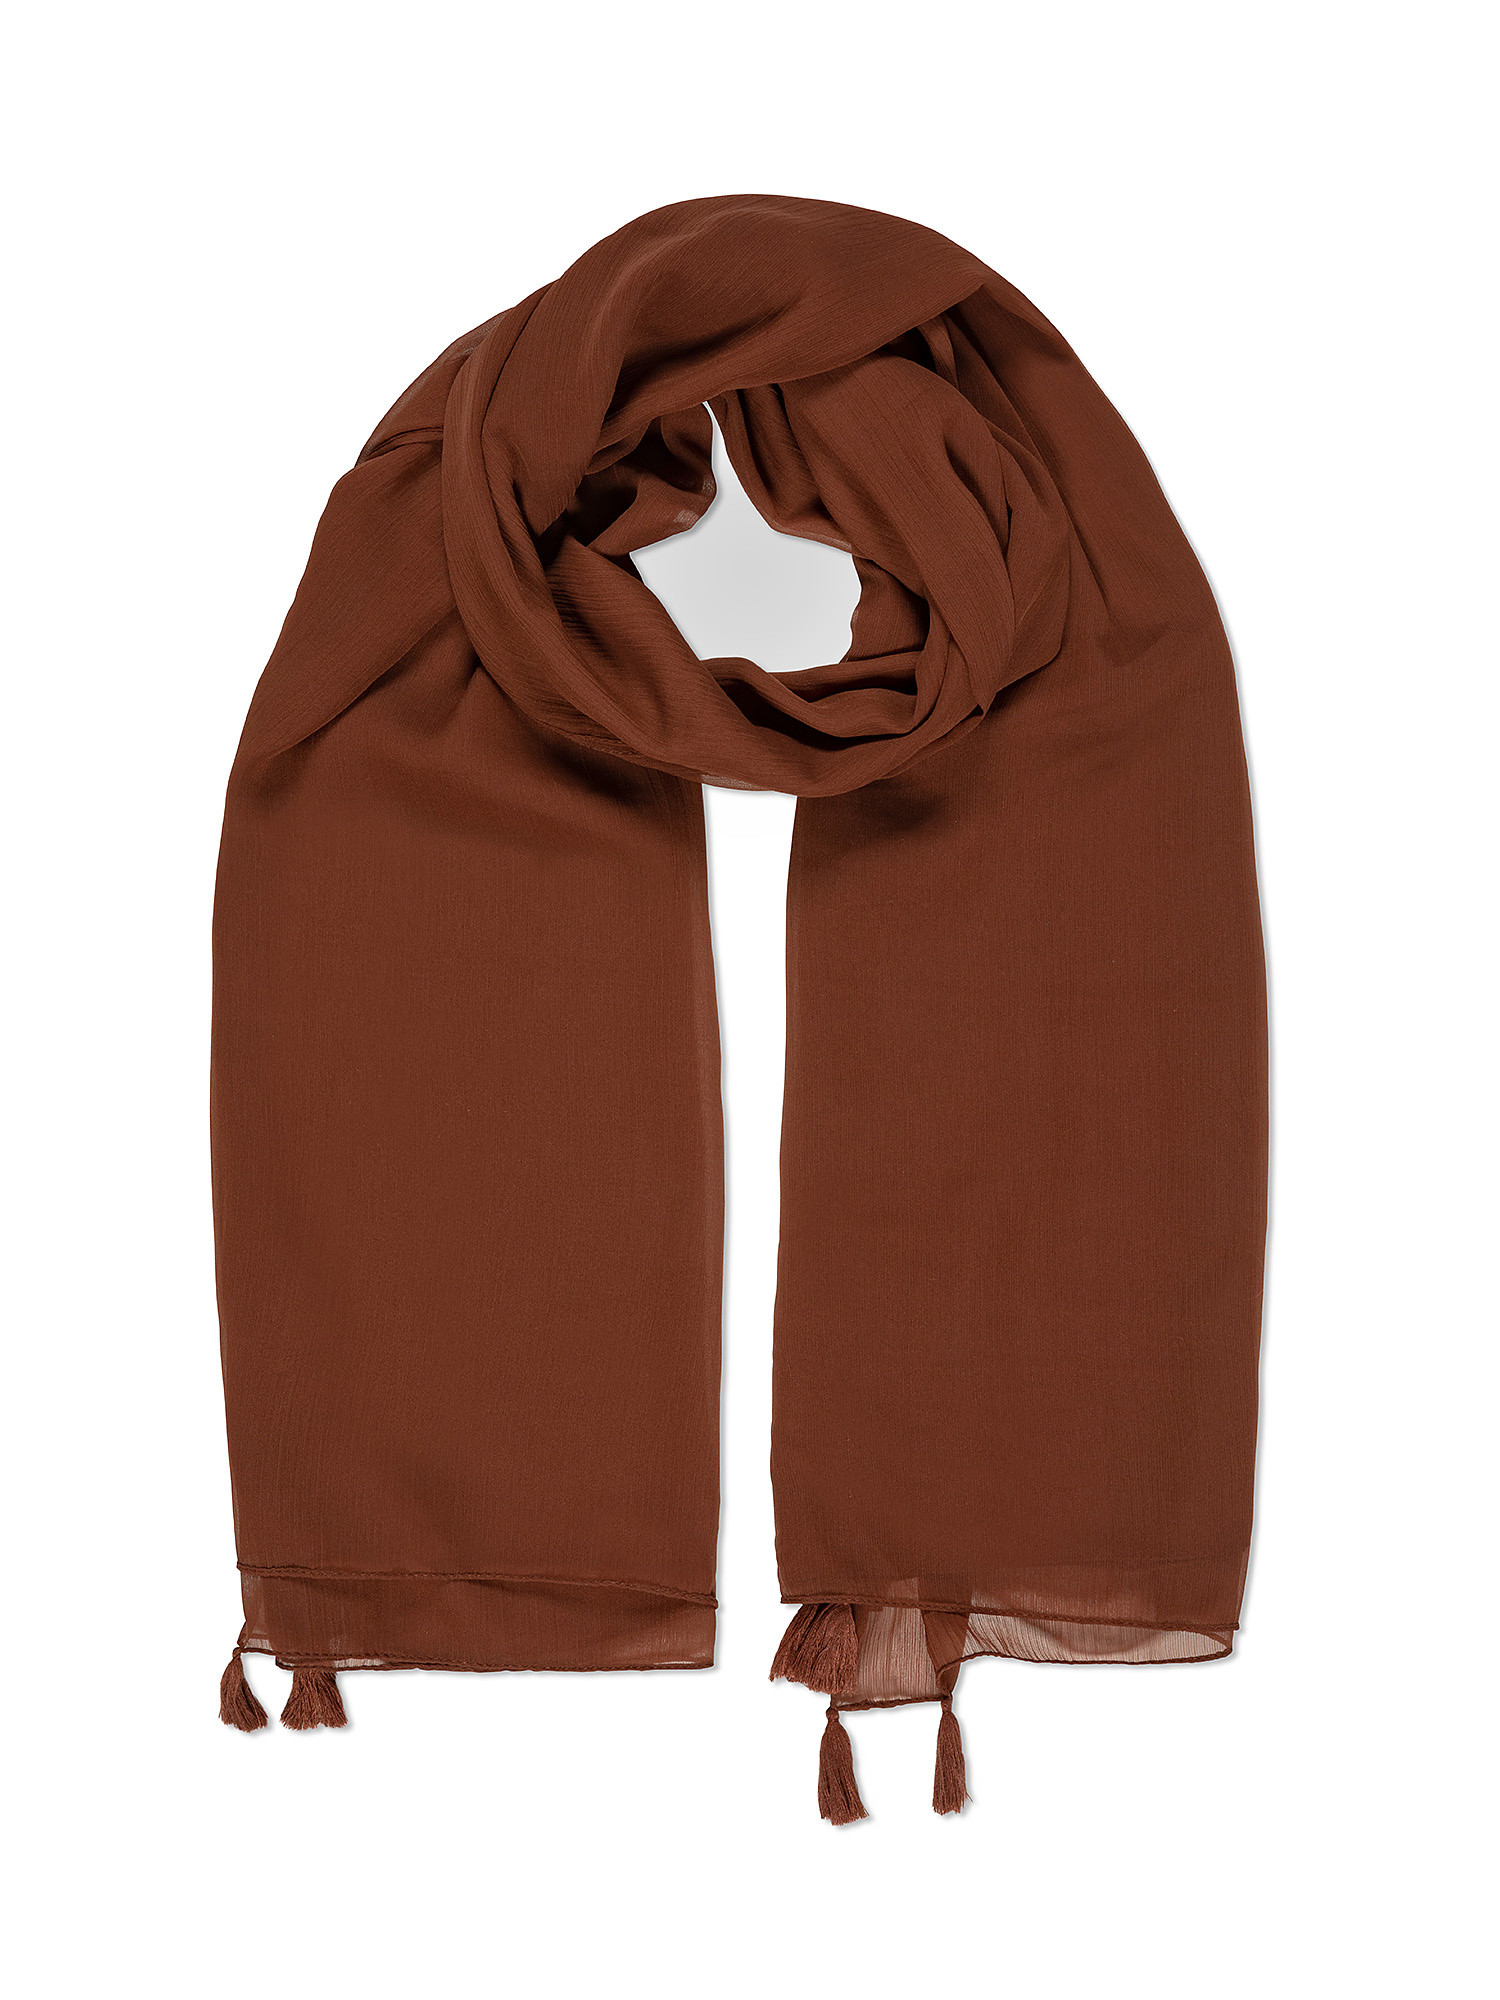 Koan - Chiffon pareo with tassels, Brown, large image number 1